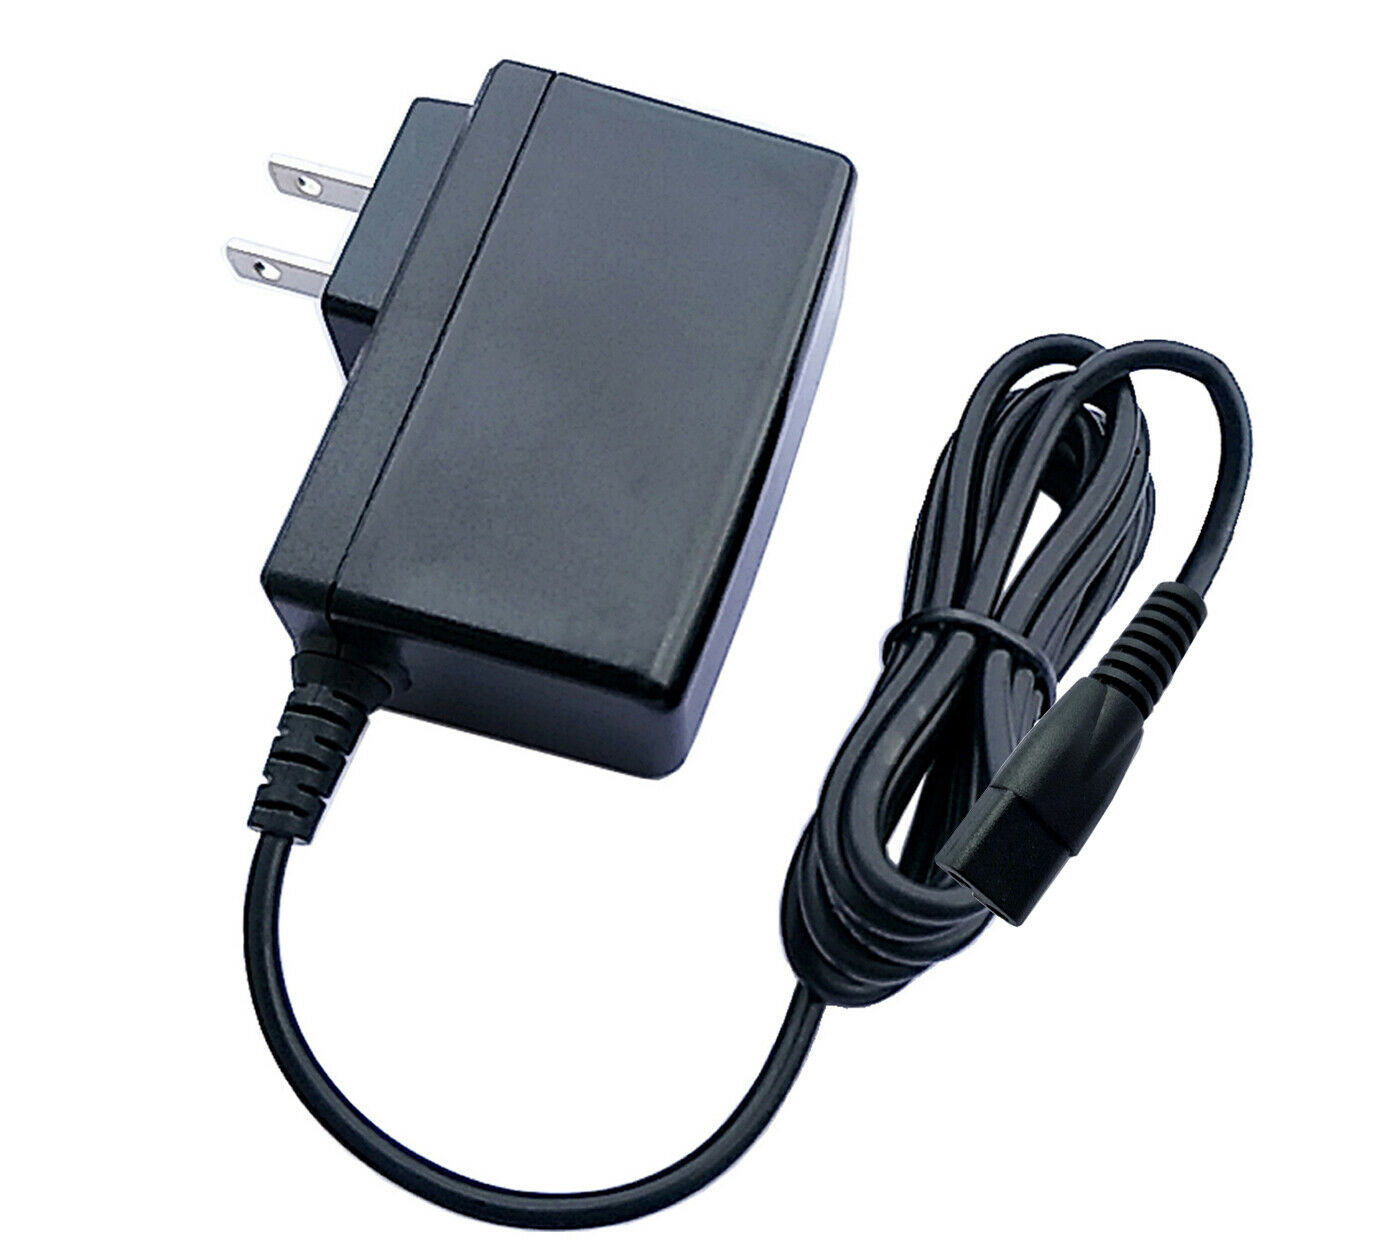 AC DC Adapter For Hoover Impulse Grab Go Cordless Vacuum BH53000 Battery Charger Type: AC/DC Adapter Compatible Mode